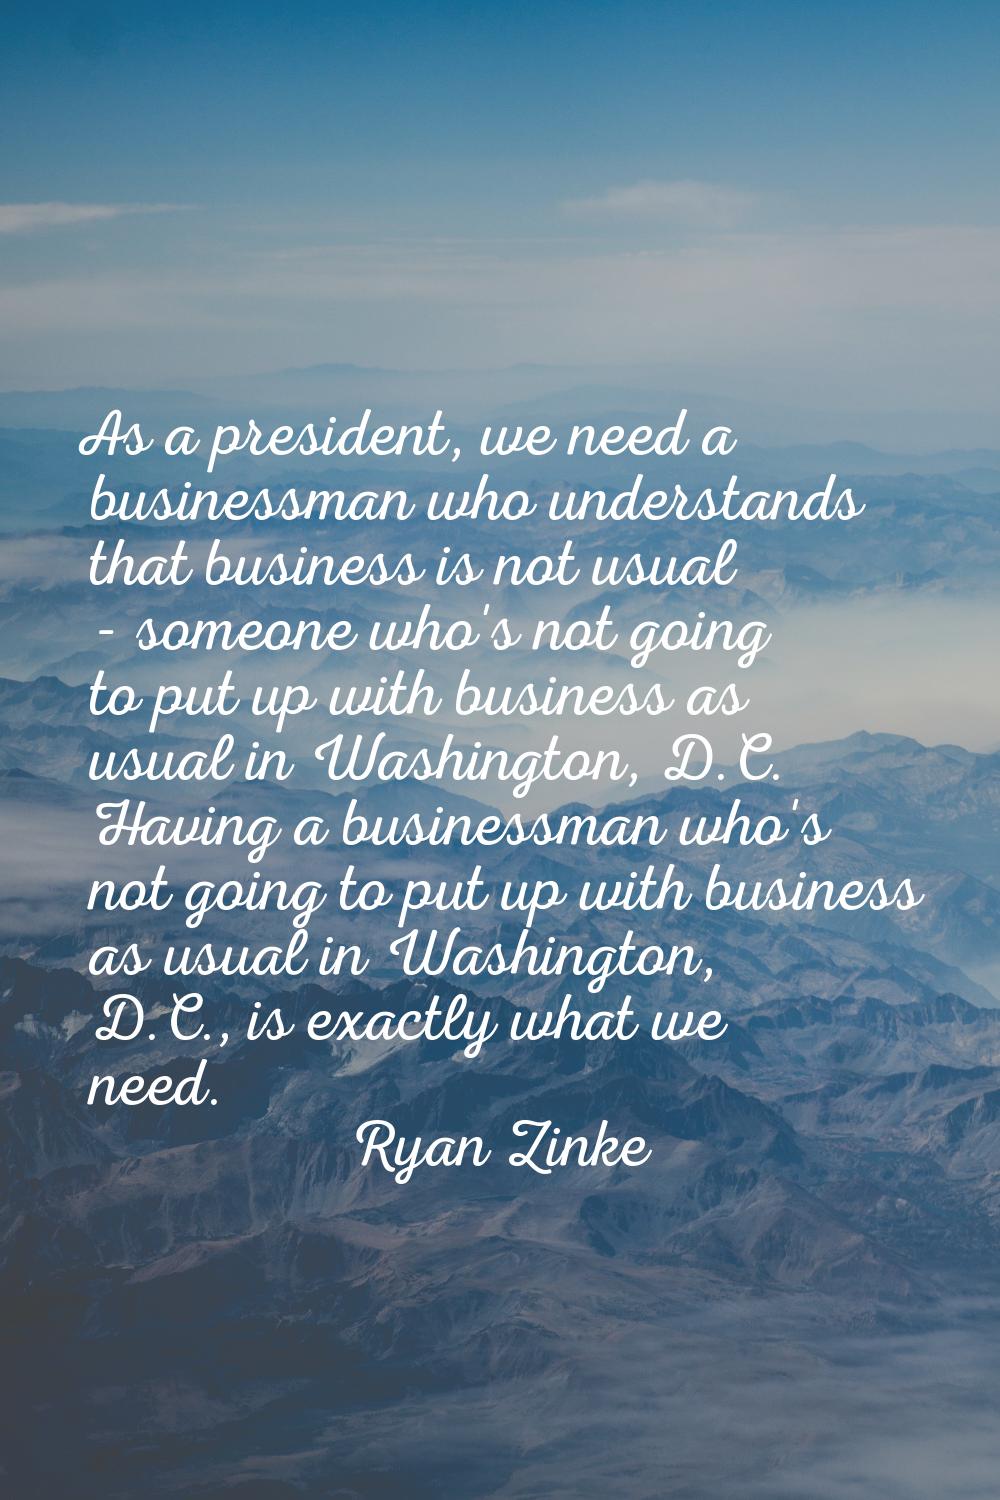 As a president, we need a businessman who understands that business is not usual - someone who's no